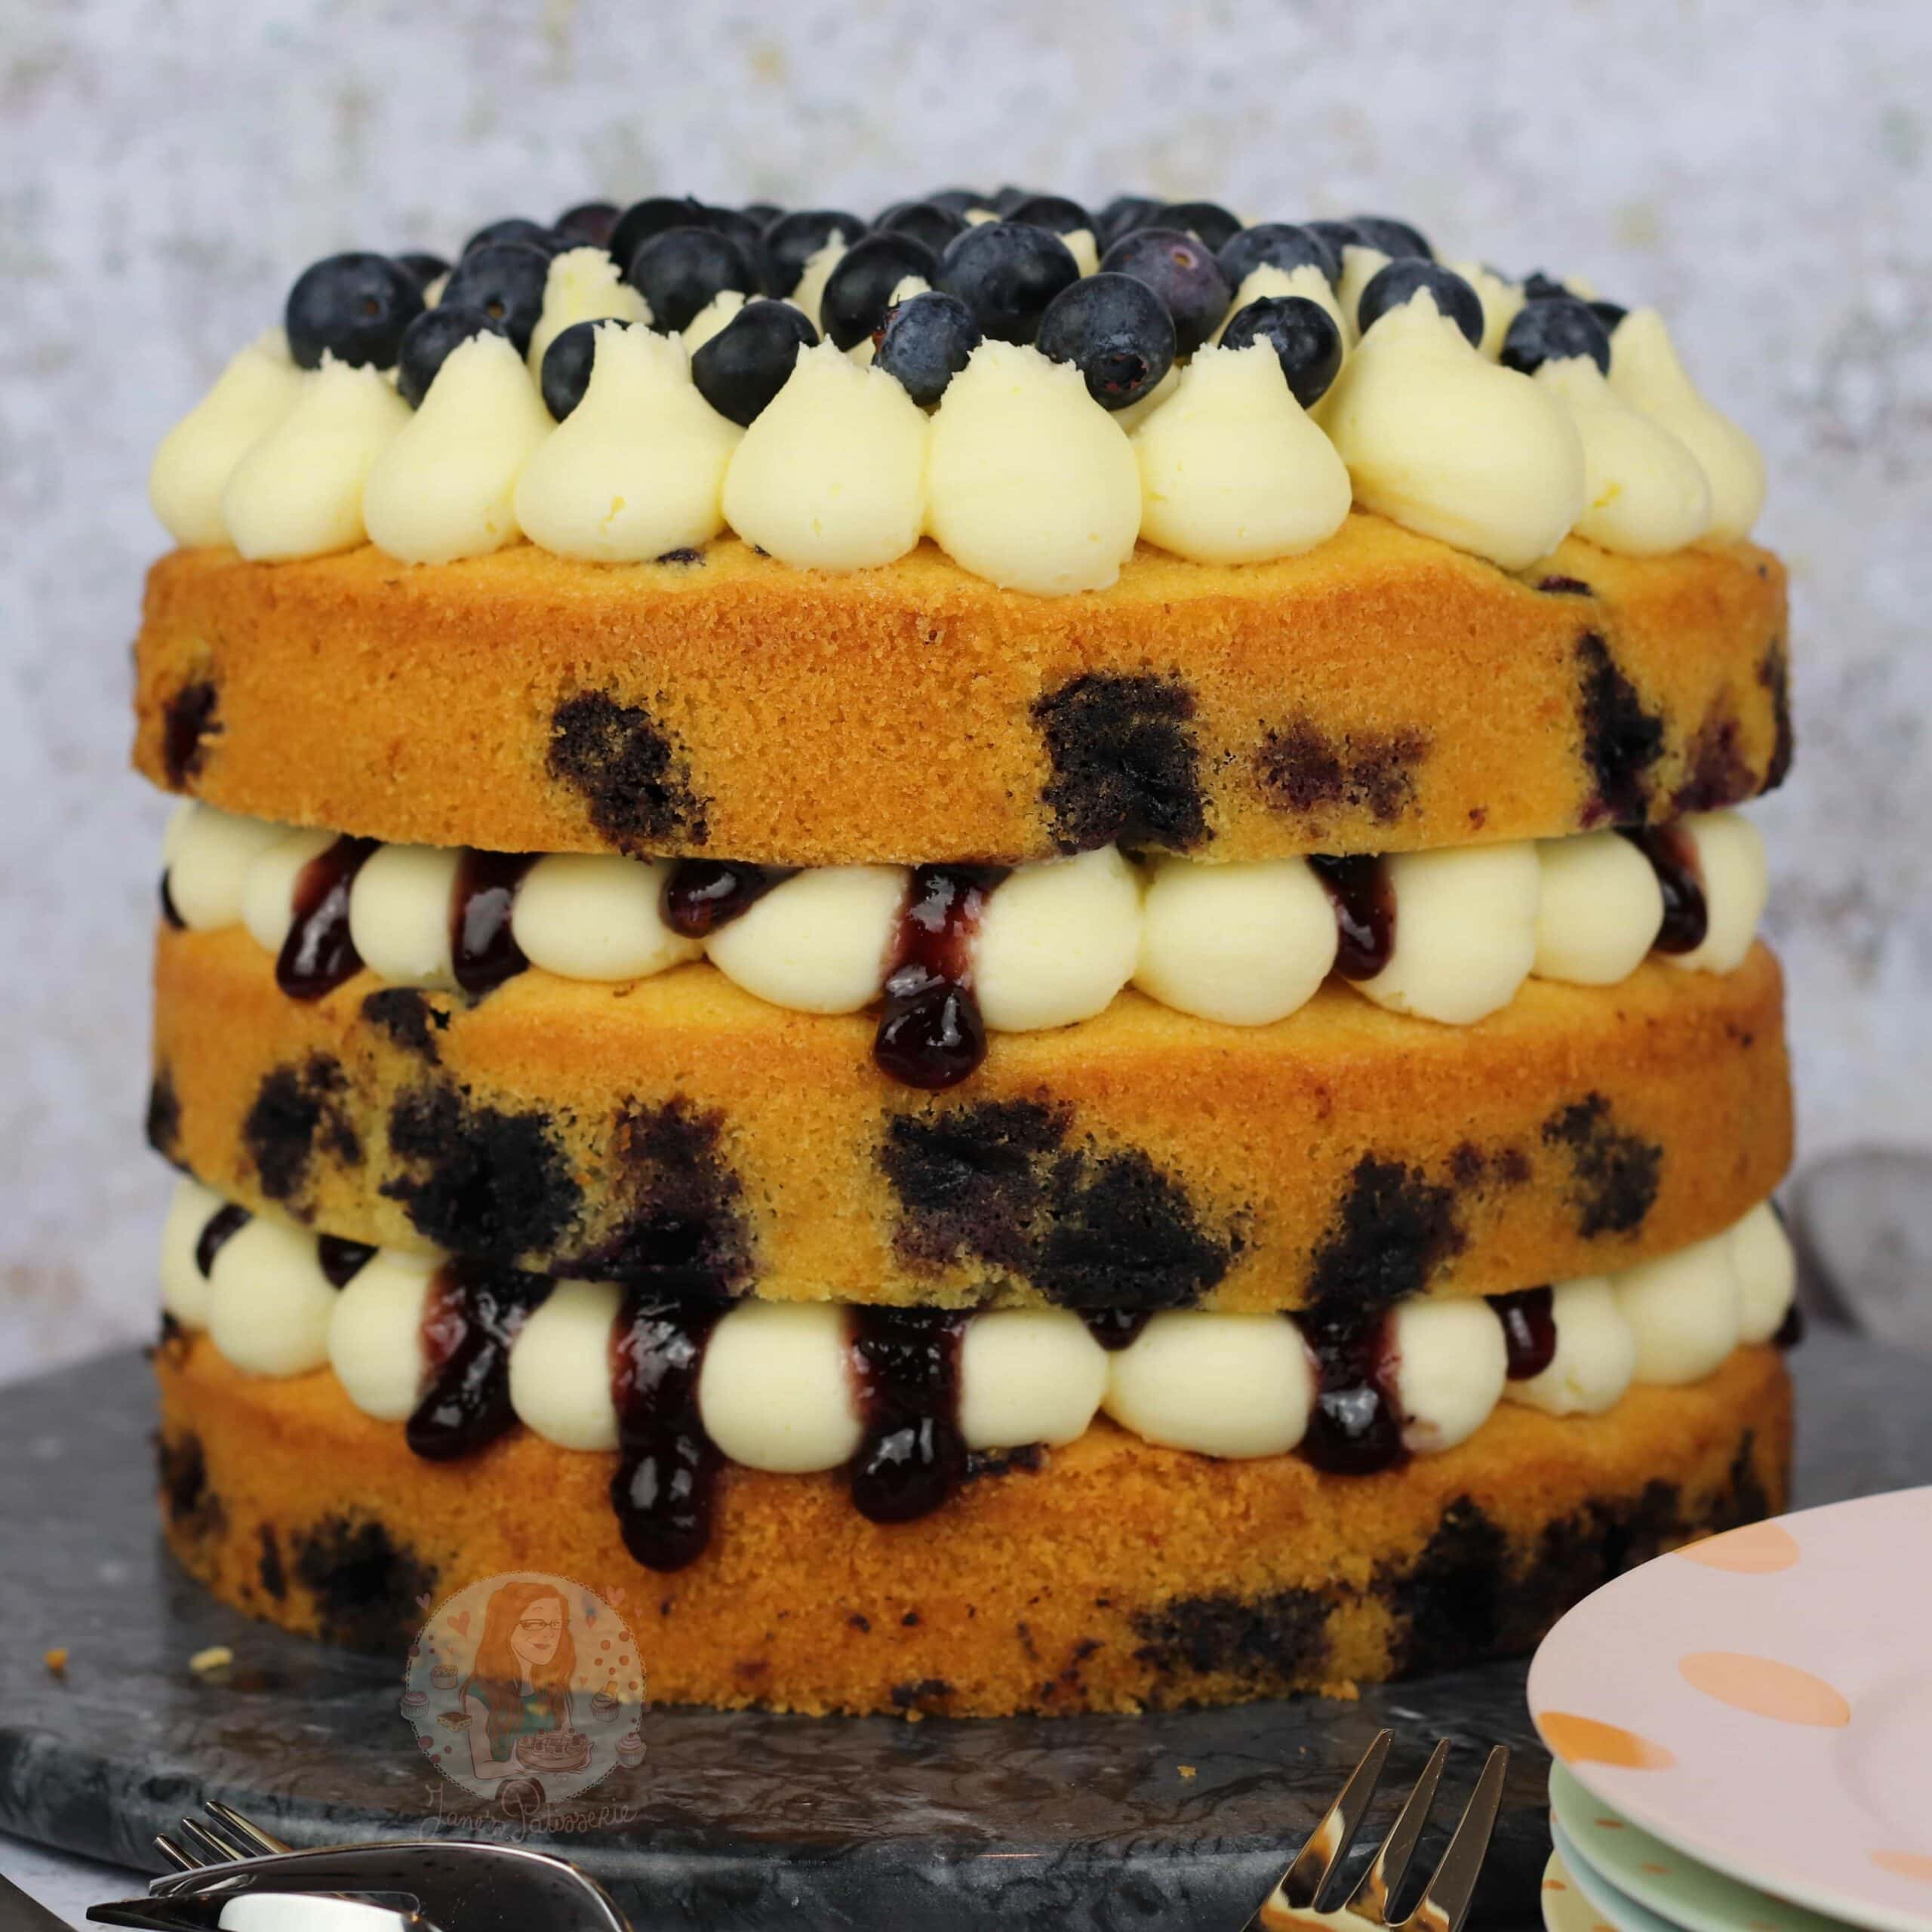 Blueberry Cake with Lemon Cream Cheese Frosting - My Cake School